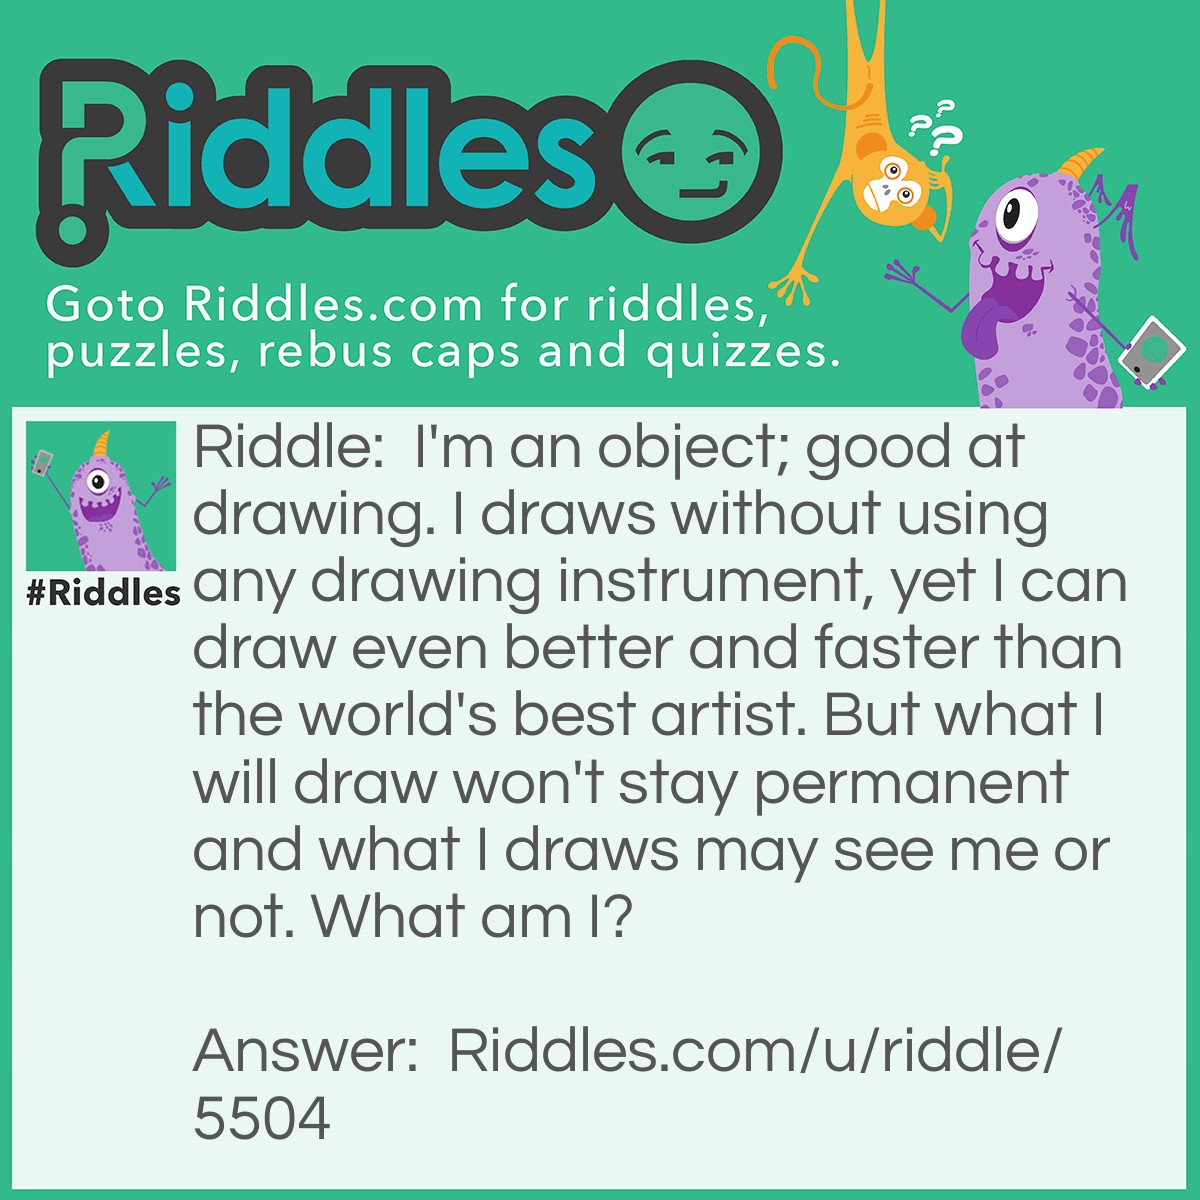 Riddle: I'm an object; good at drawing. I draws without using any drawing instrument, yet I can draw even better and faster than the world's best artist. But what I will draw won't stay permanent and what I draws may see me or not. What am I? Answer: A mirror. Humans can see it but objects cannot.